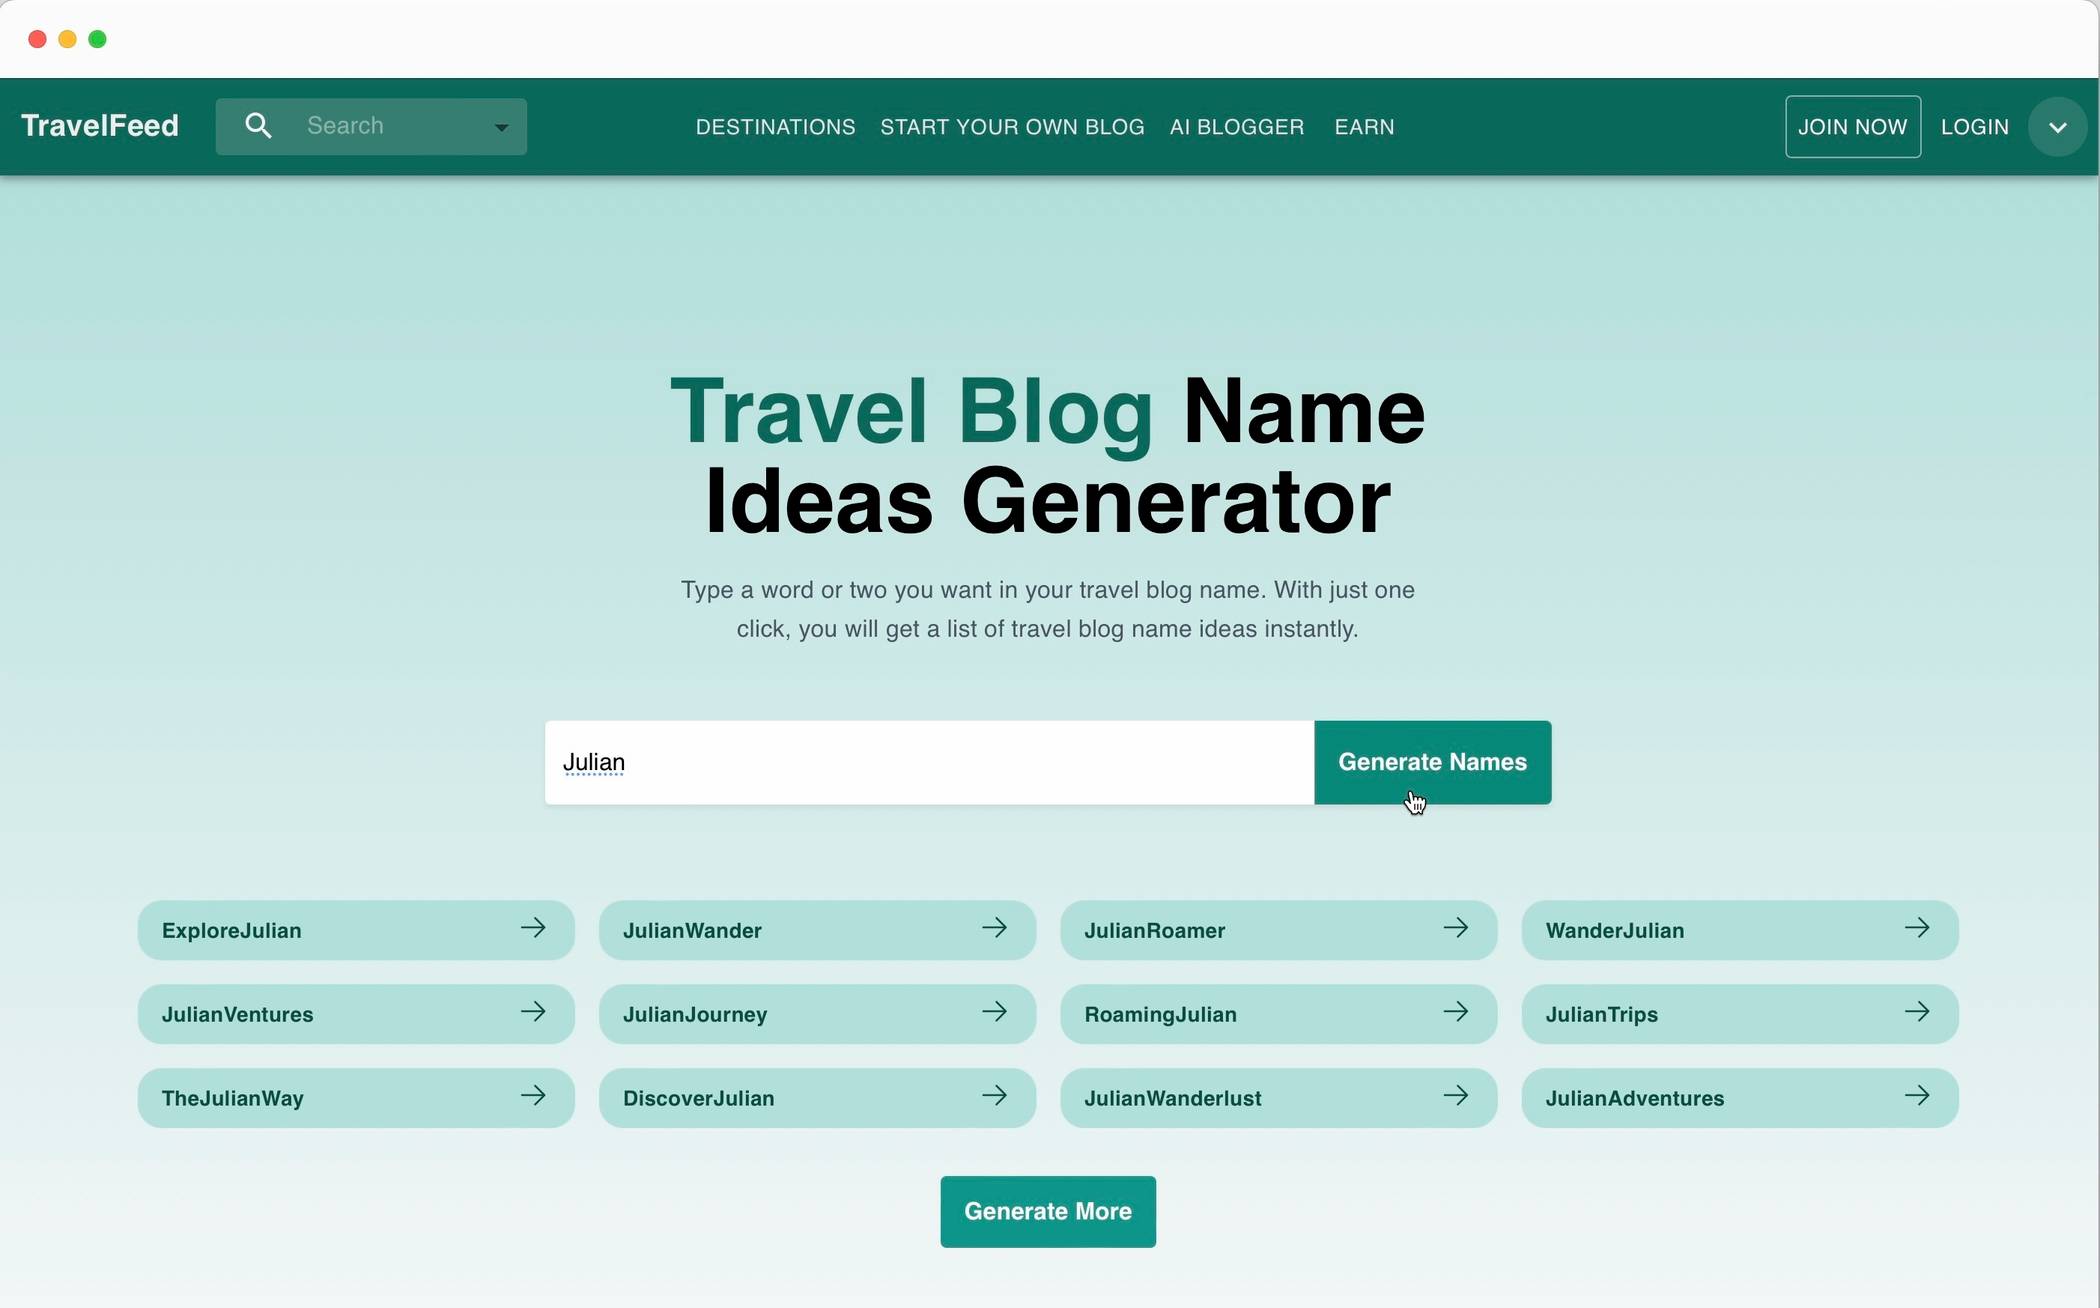 Find the perfect name for your travel blog with TravelFeed’s name ideas generator